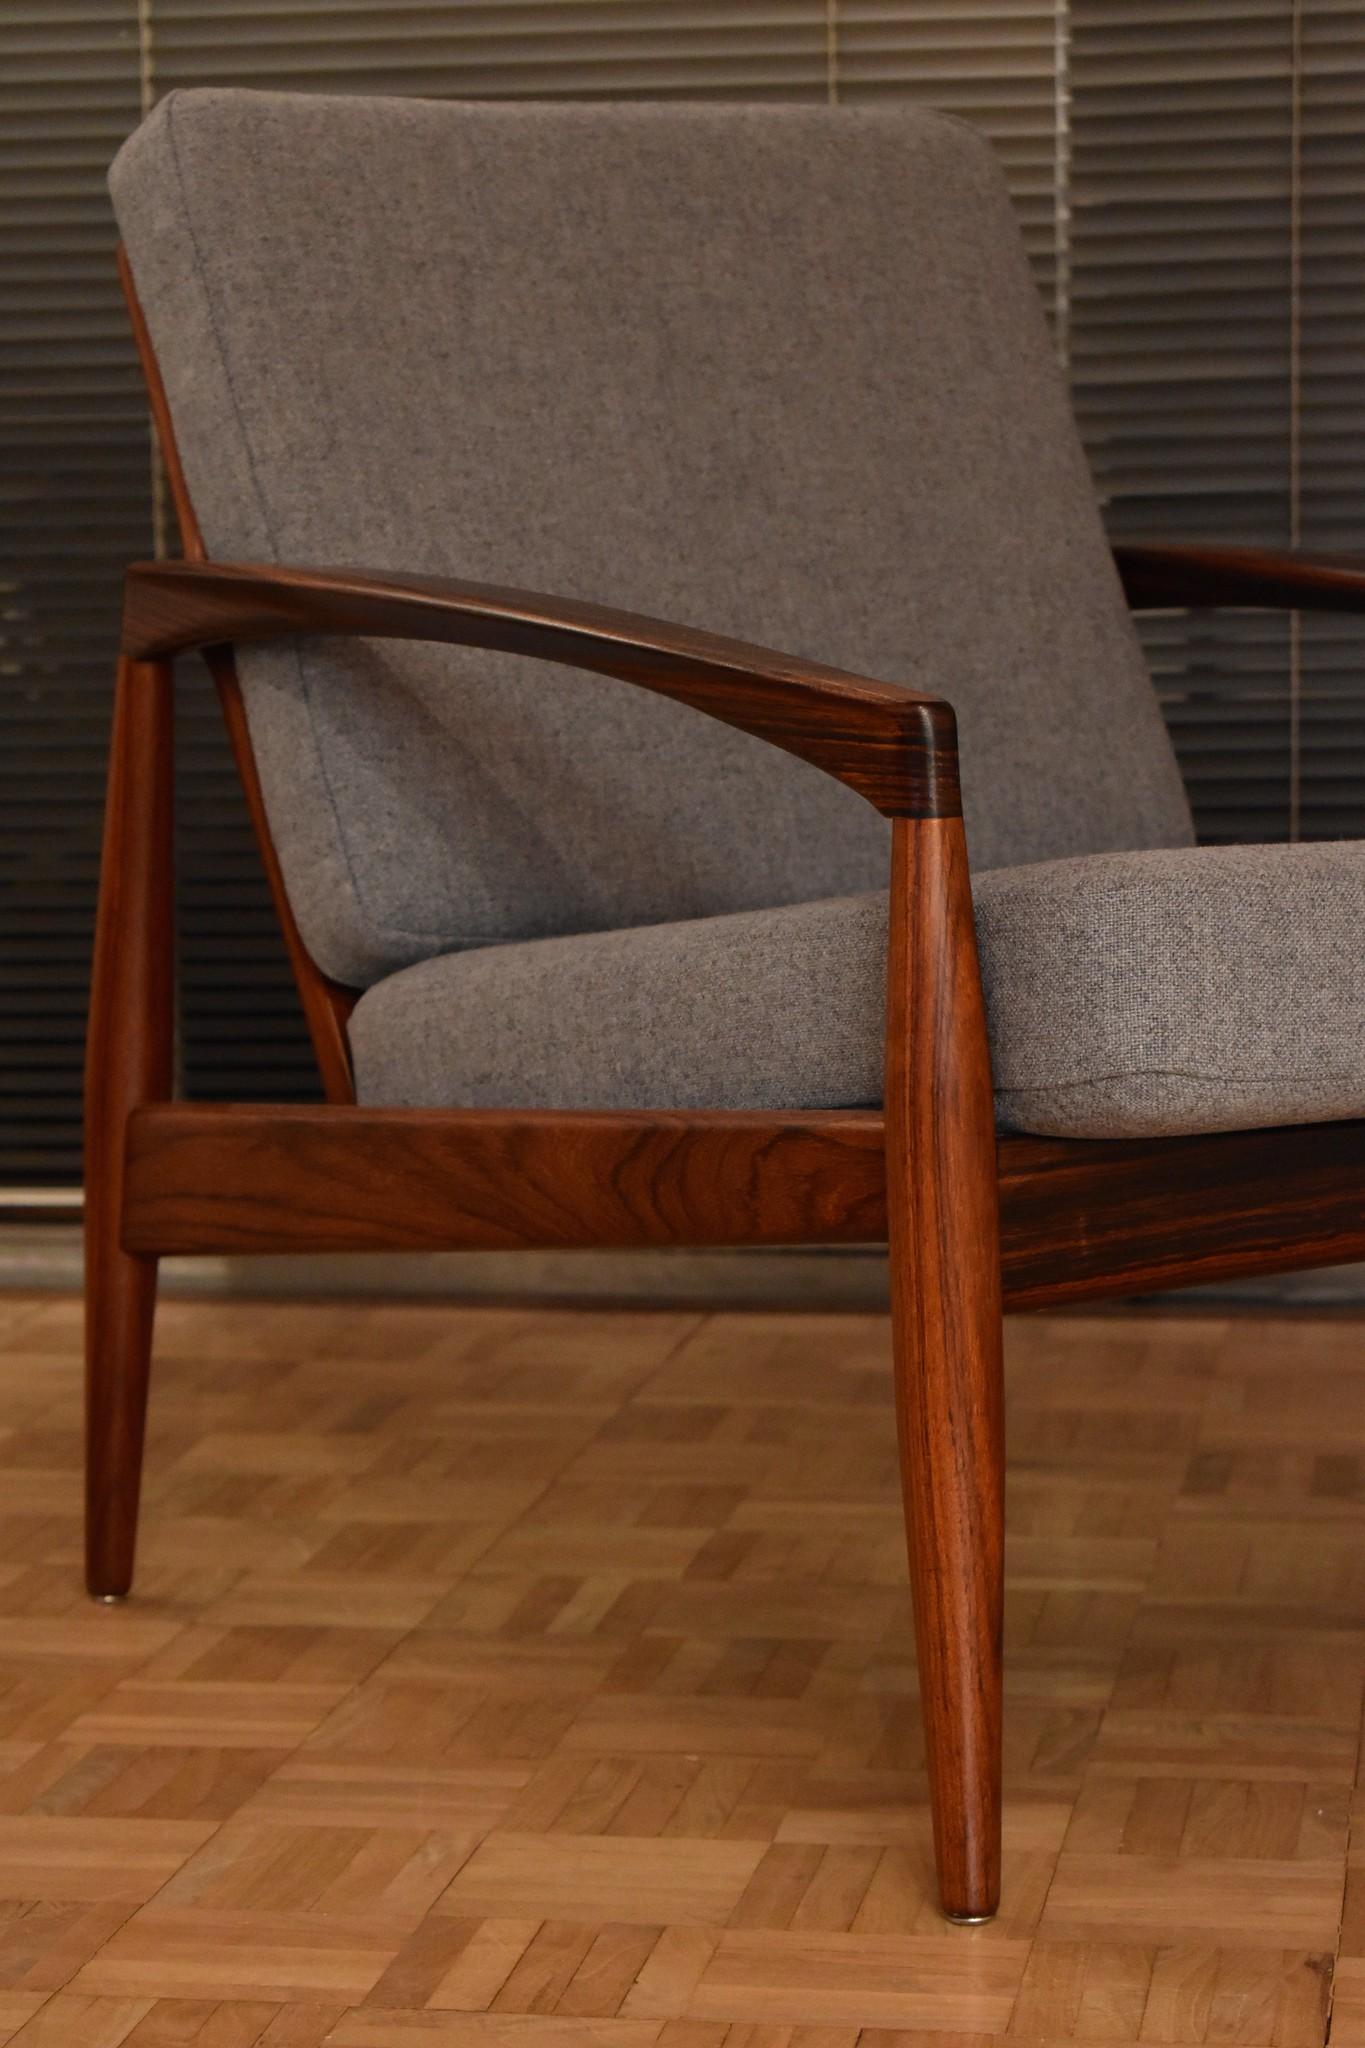 An outstanding pair of solid rosewood Model 121 ‘Paperknife’ chairs designed in the late 1950s by Kai Kristiansen.

Produced to a very high standard by Magnus Olesen, Denmark. The original cushions have been reupholstered using Kvadrat fabric.